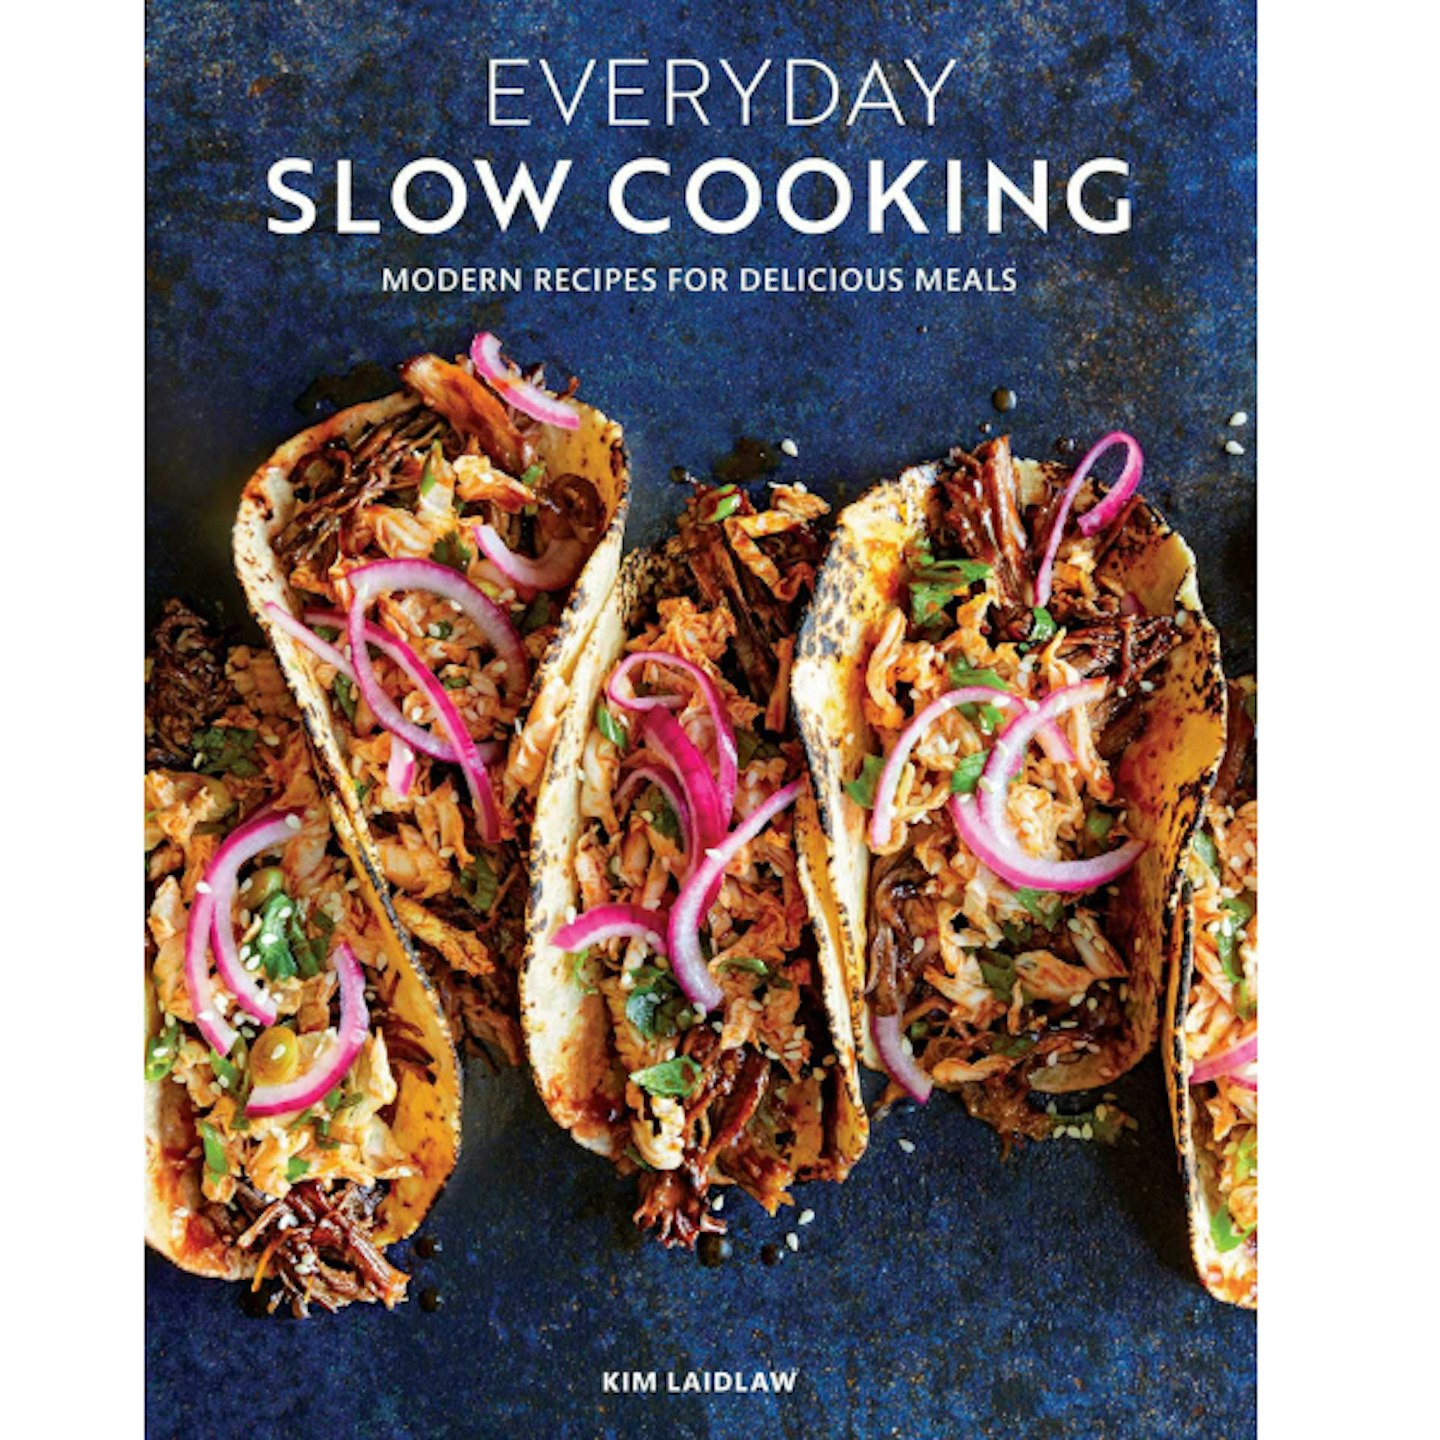 Slow Cook Modern: 200 Recipes for the Way We Eat Today by Liana Krissoff